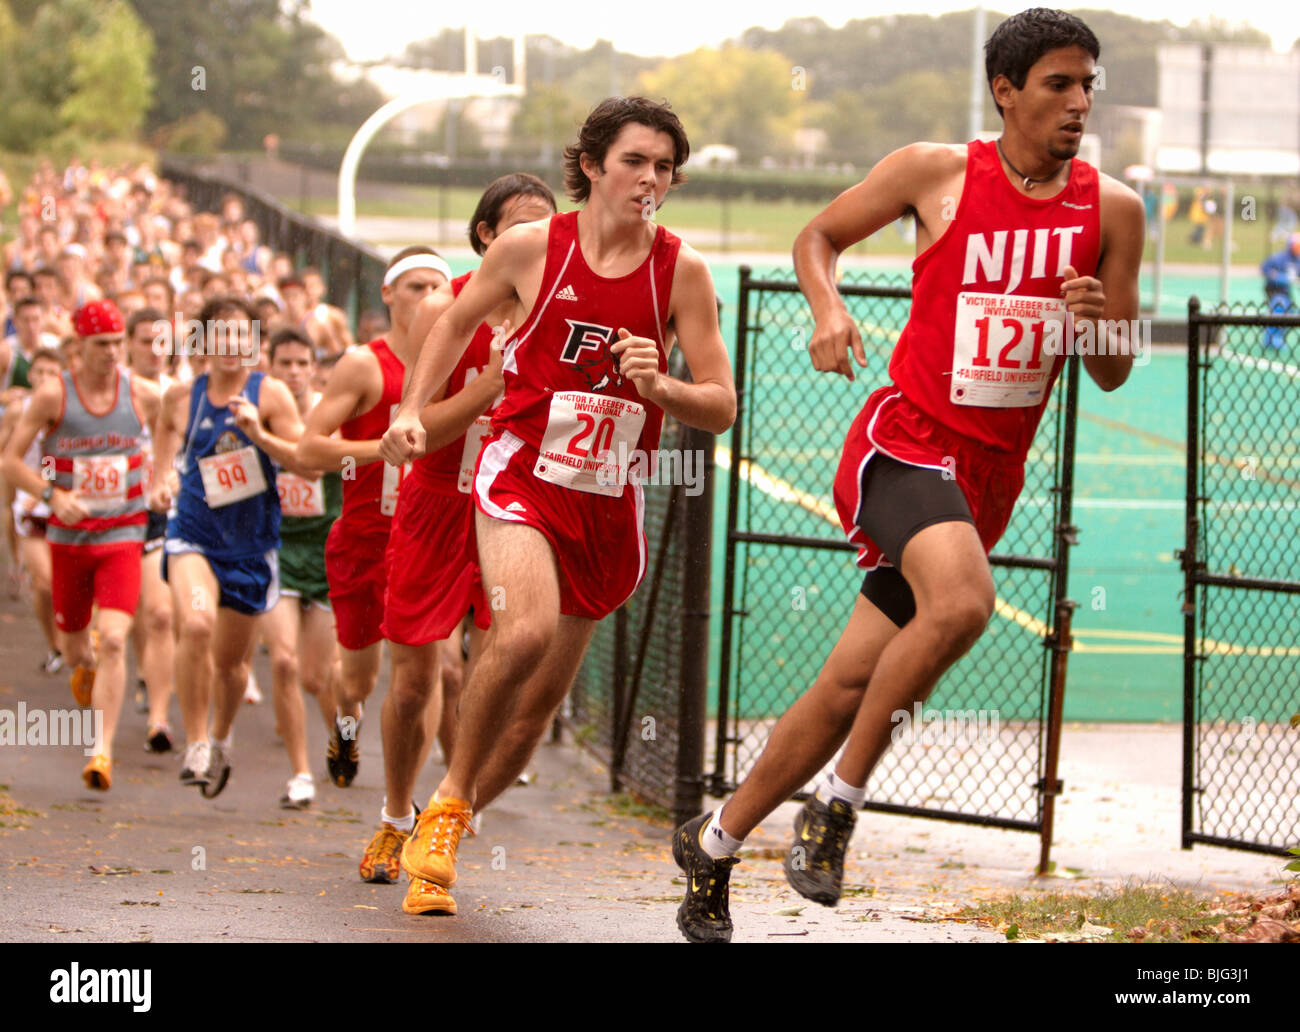 Highlander Umar Saeed of NJIT leading the pack in the men's 8k run XC, at the 32nd Annual Father Leeber S.J. Invitational, 2008. Stock Photo